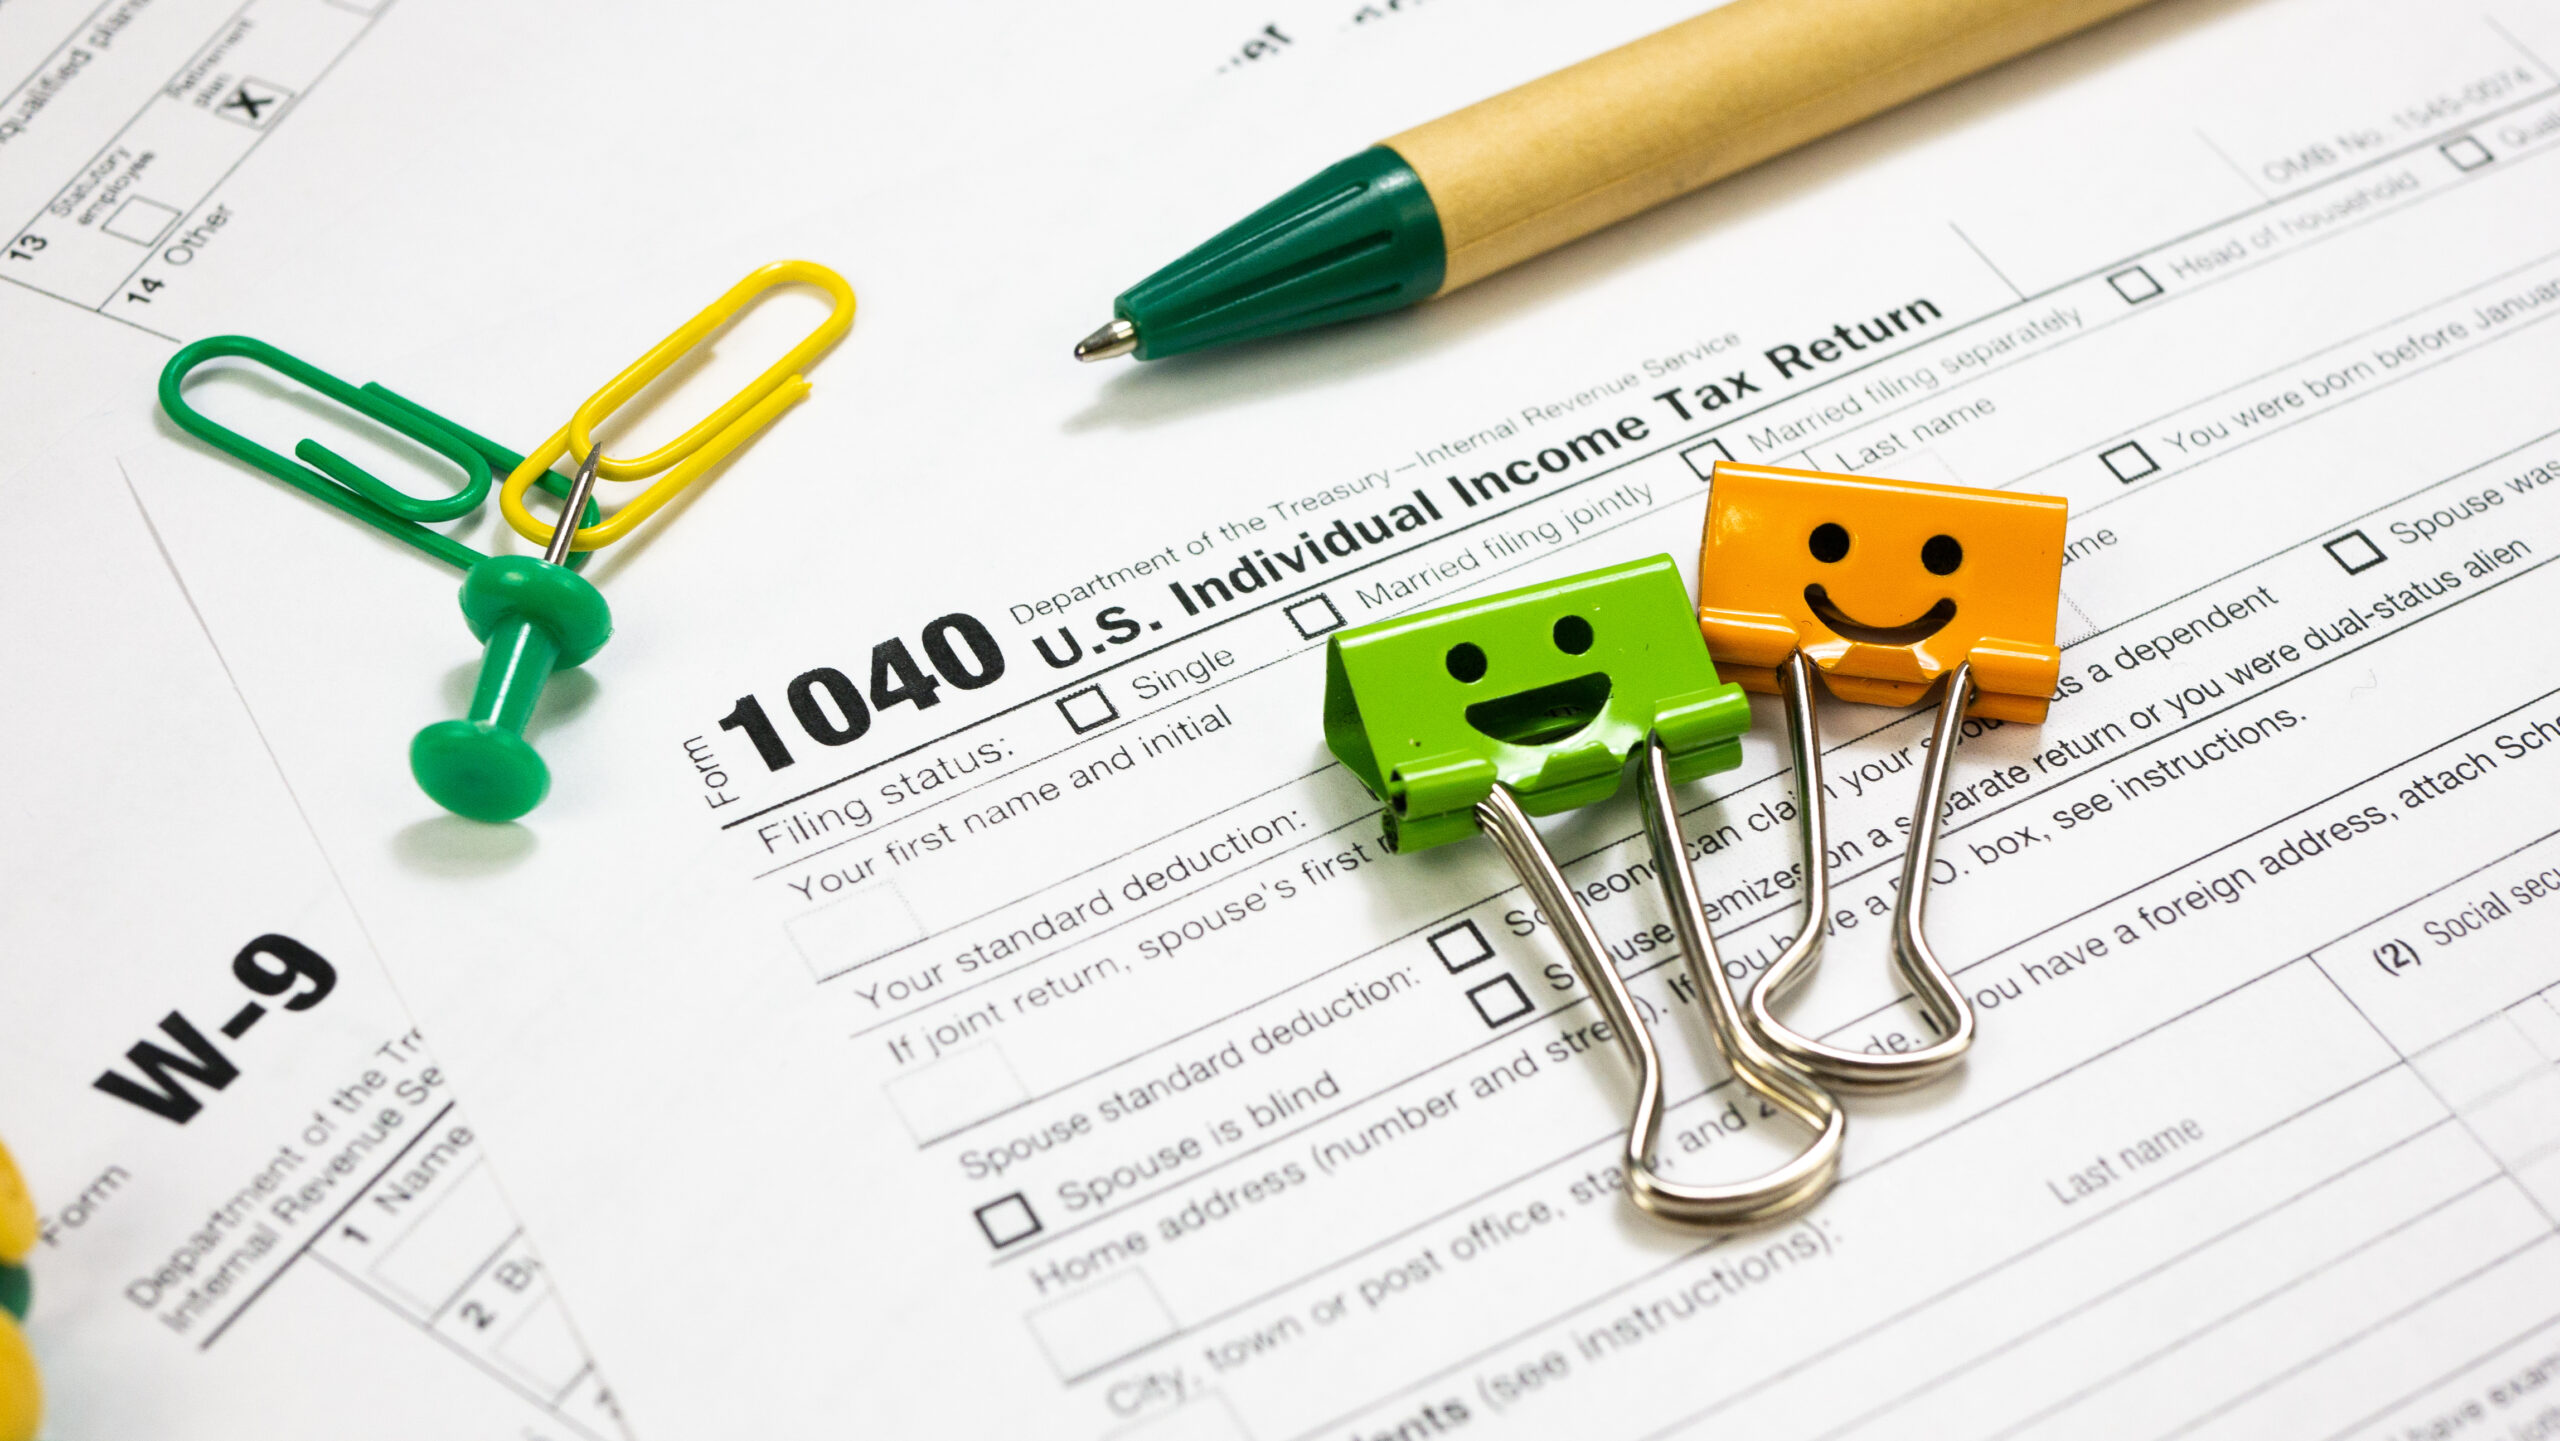 IRS 1040 and W-9 U.S. Tax Forms with smile binder clips, pen and clips. Wage statement and tax time concept